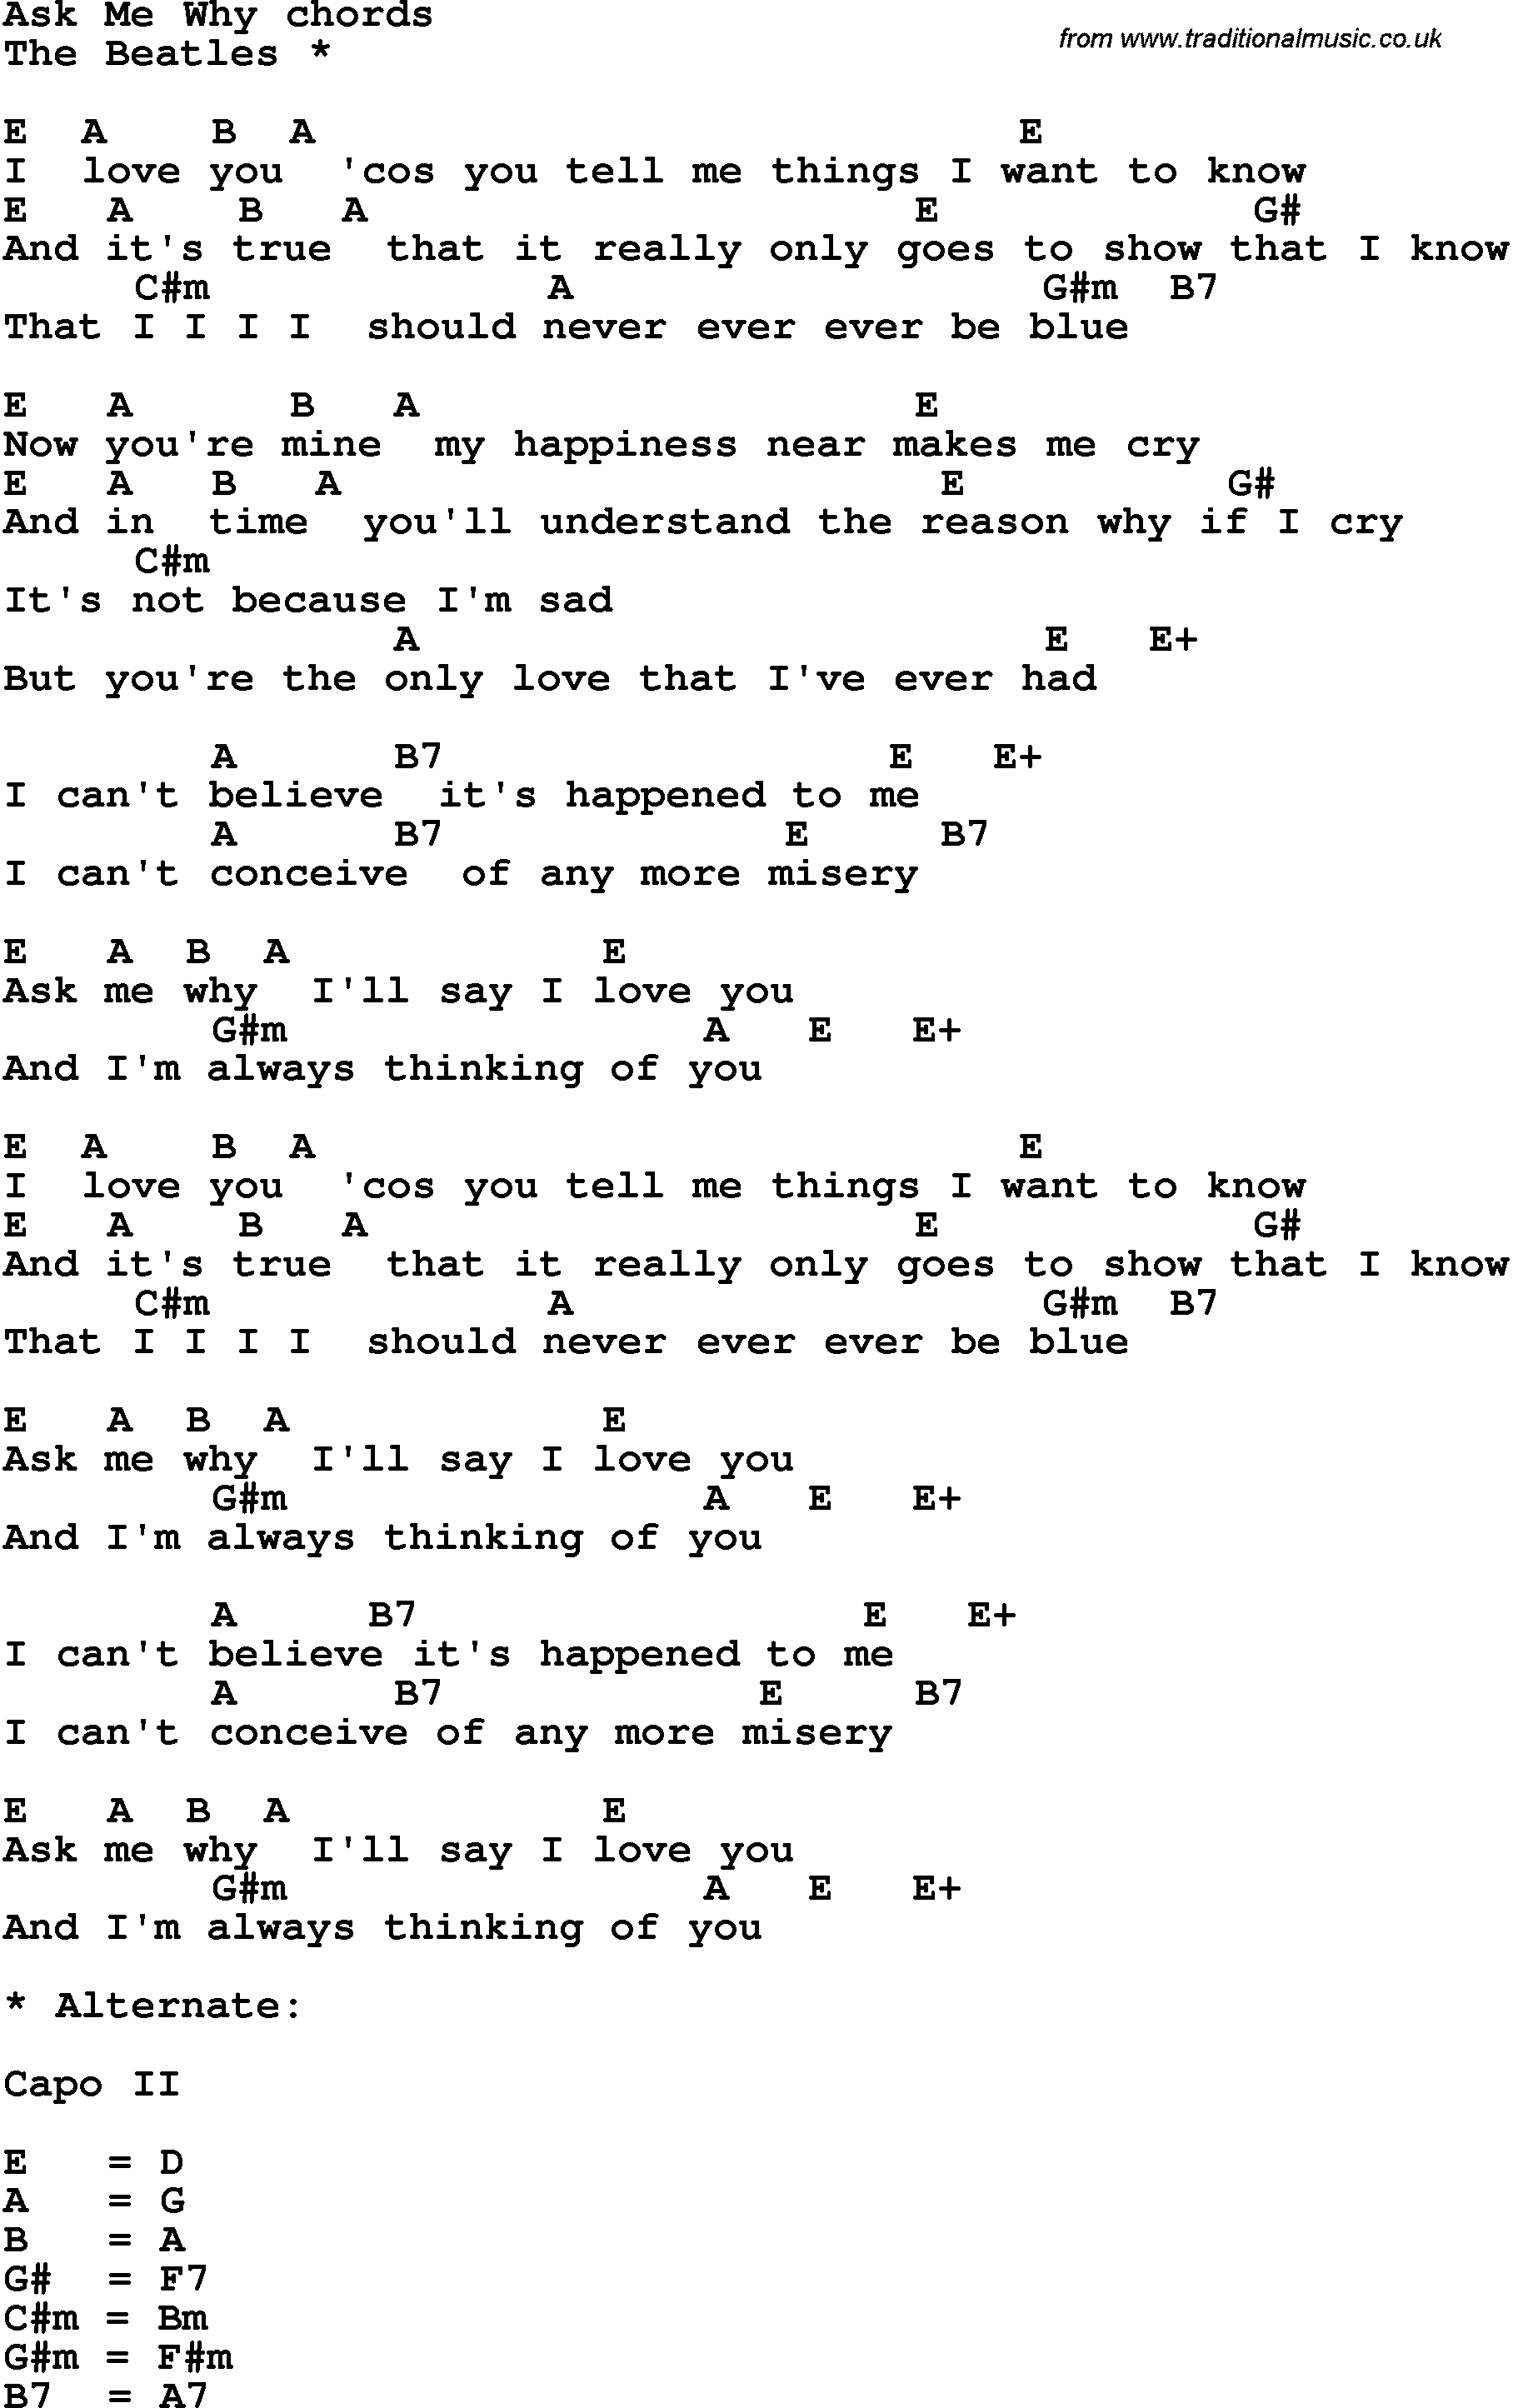 Song Lyrics with guitar chords for Ask Me Why - The Beatles